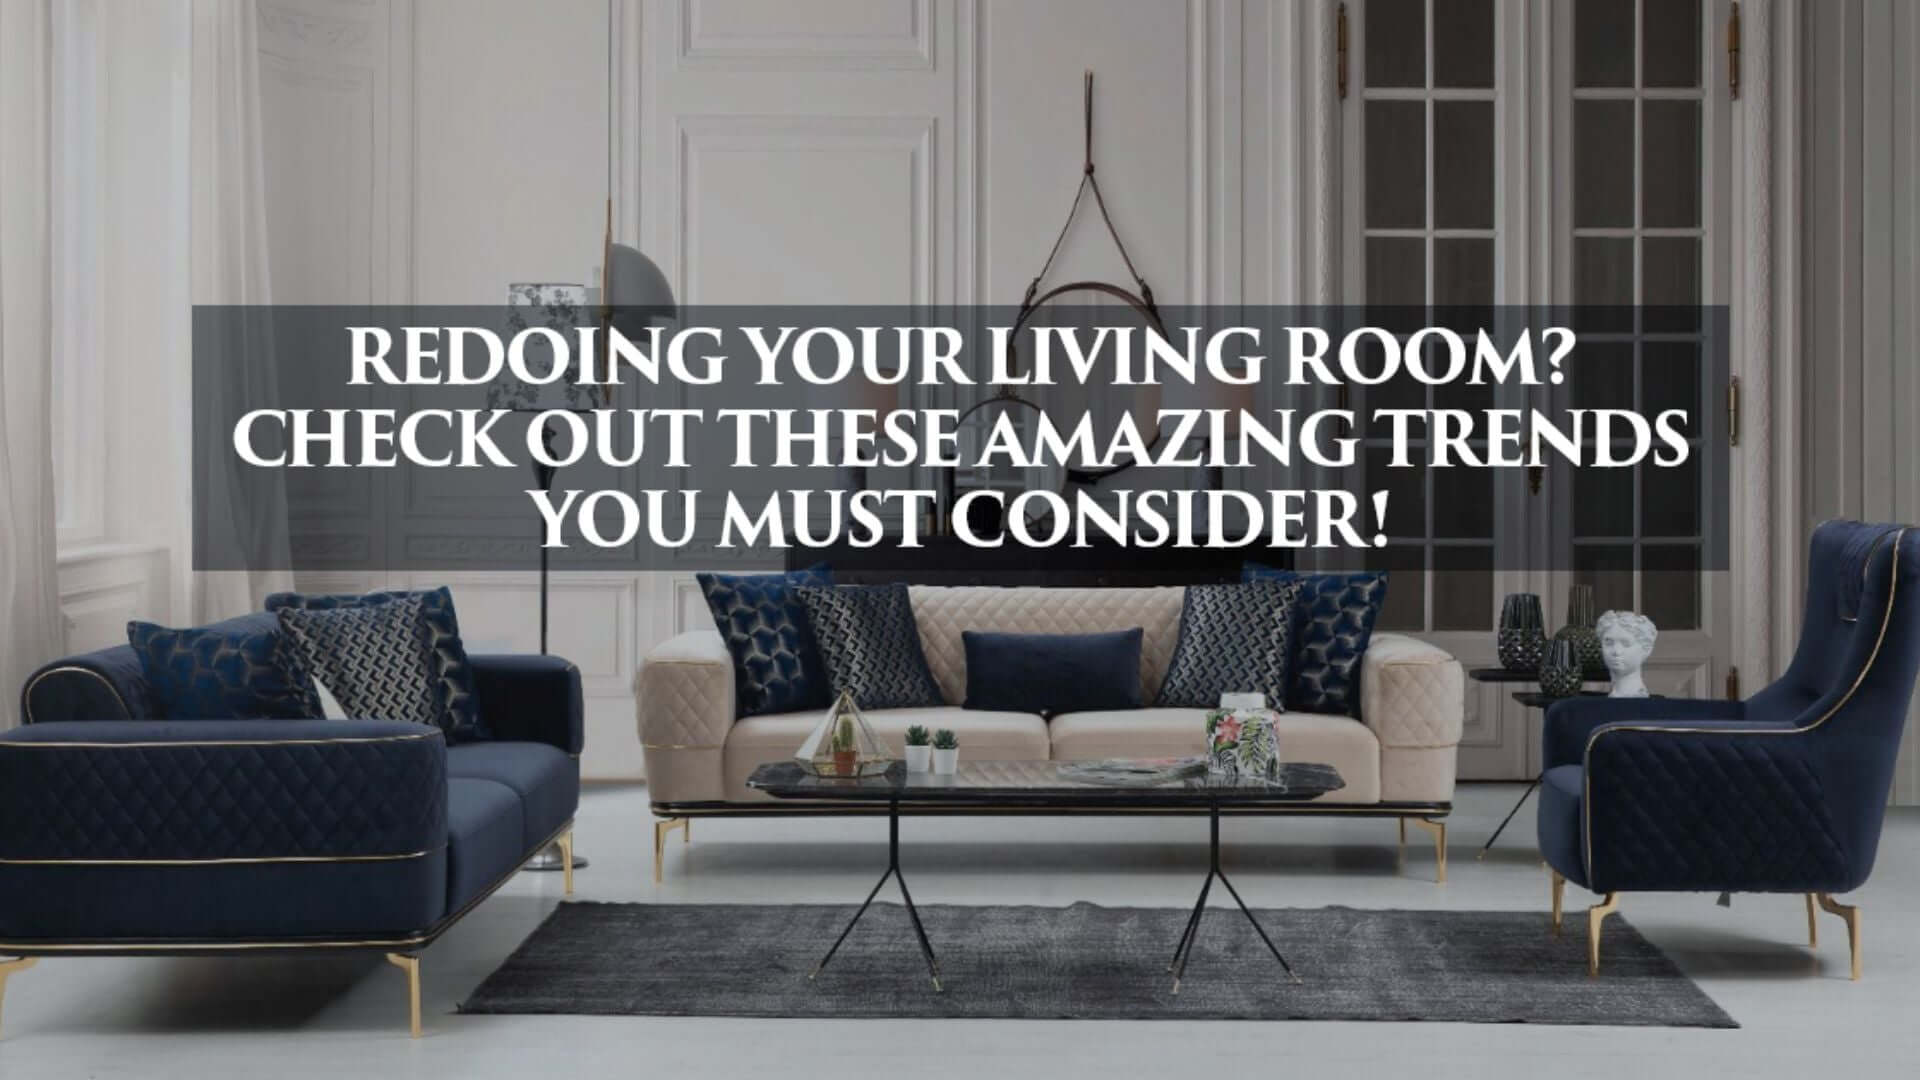 Redoing Your Living Room? Check Out These Amazing Trends You Must Consider!